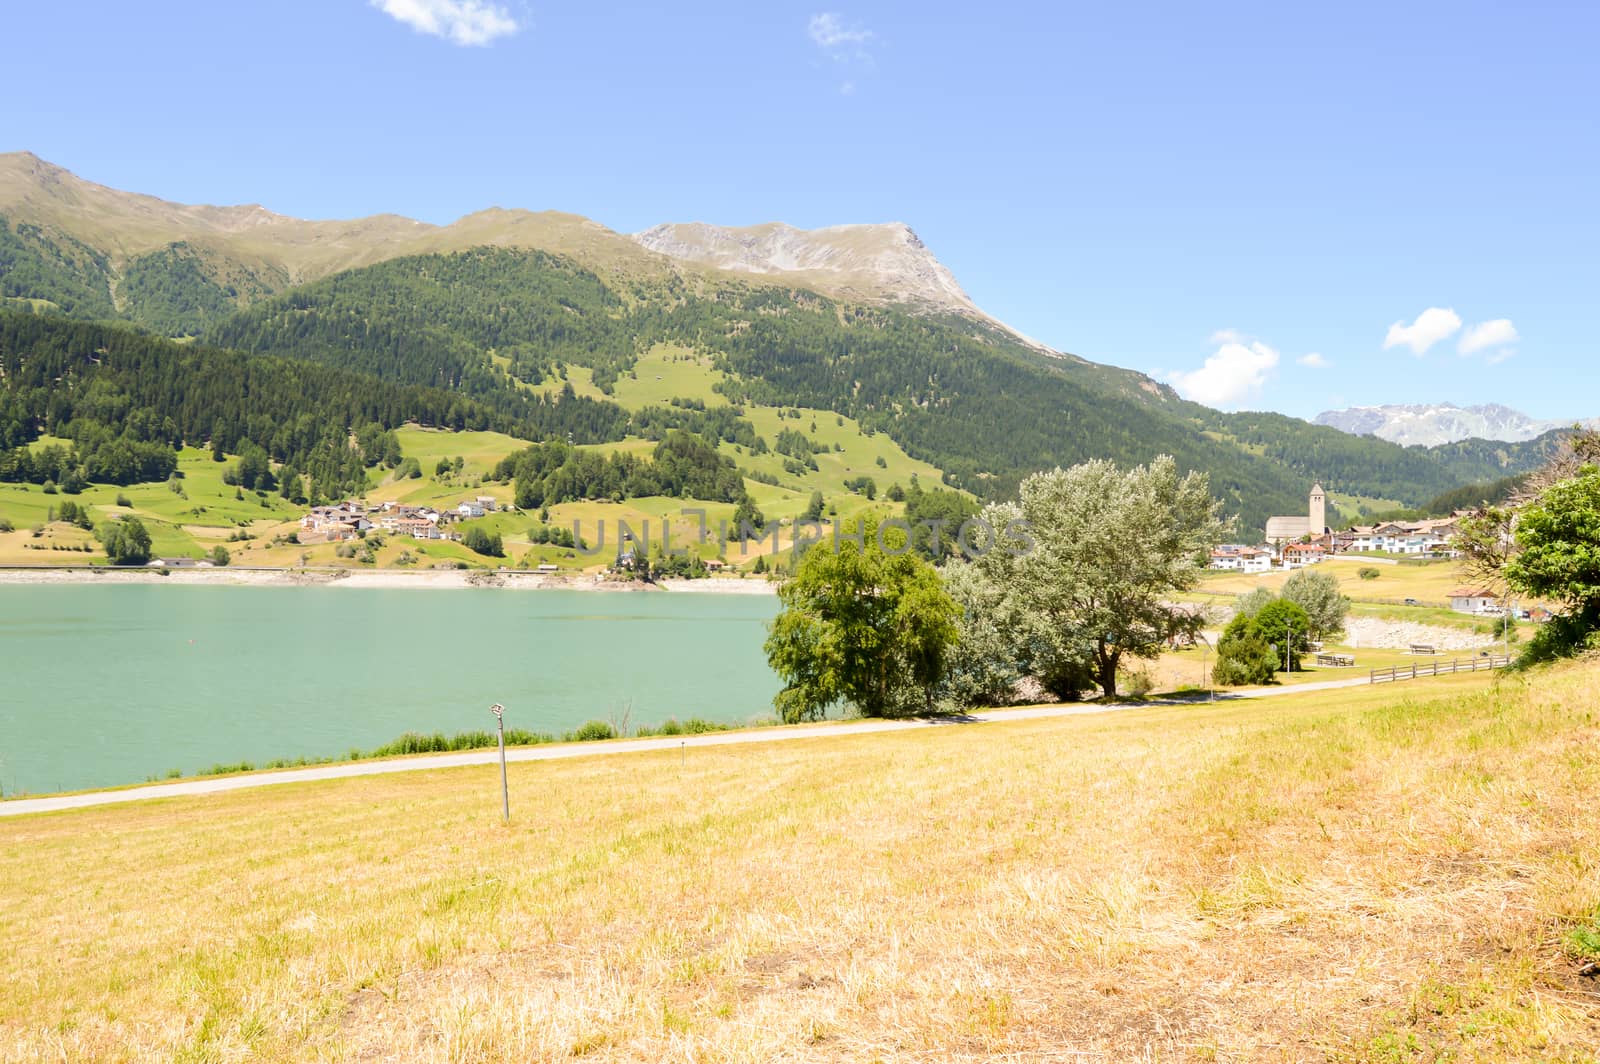 View of Lake Resia in northern Italy, in the Trentino-Alto Adige region